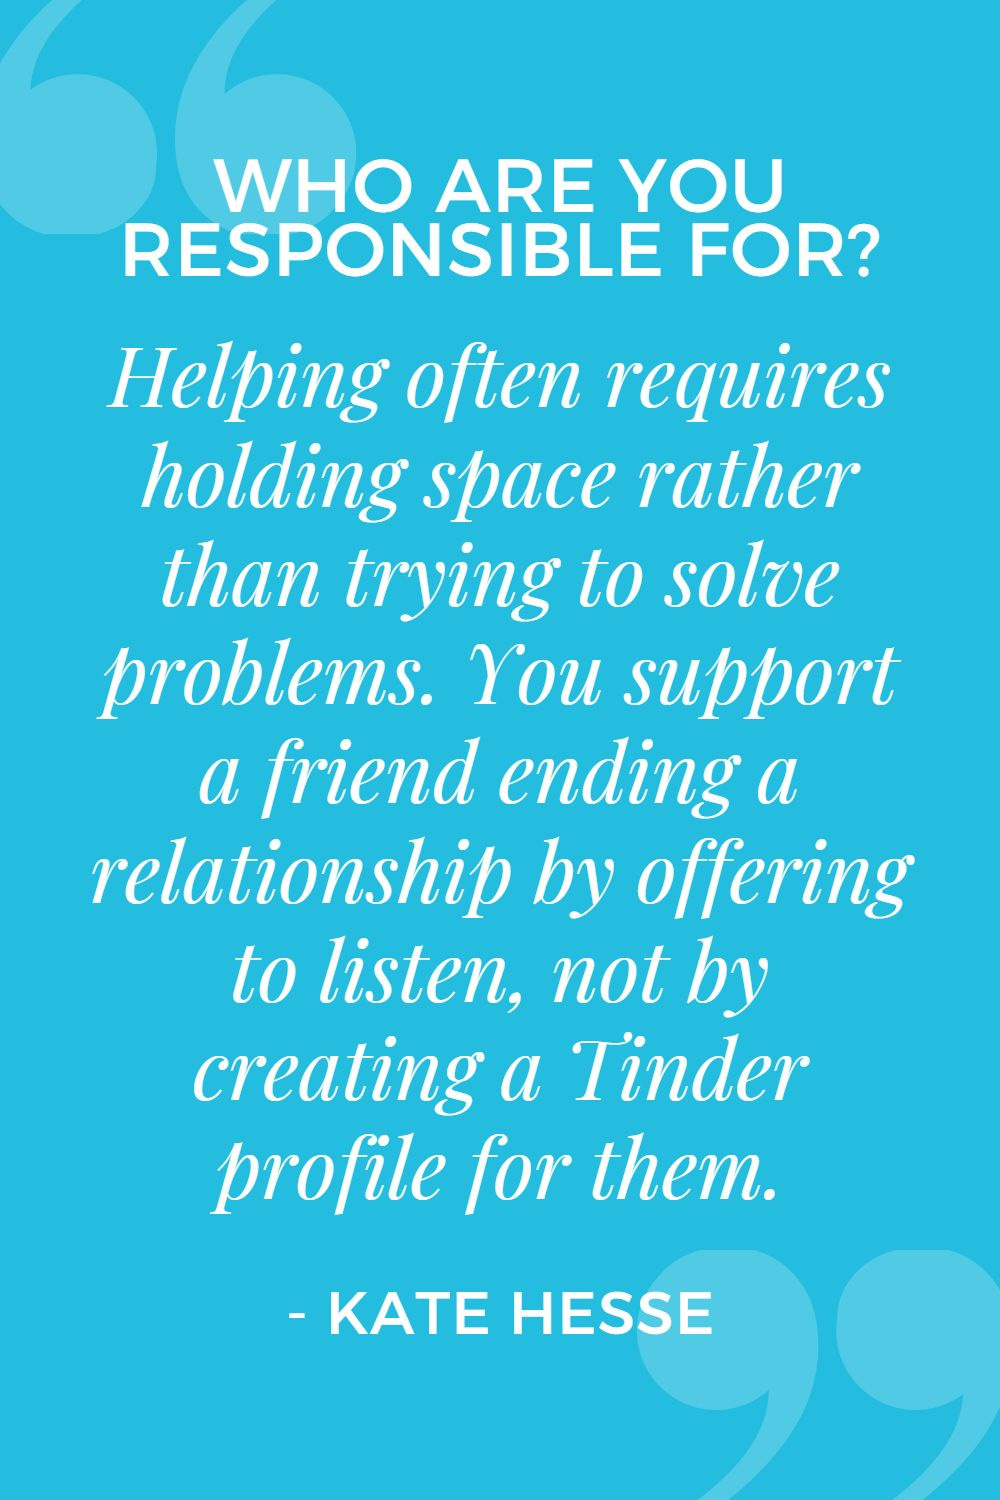 Helping often requires holding space rather than trying to solve problems. You support a friend ending a relationship by offering to listen, not by creating a Tinder profile for them.